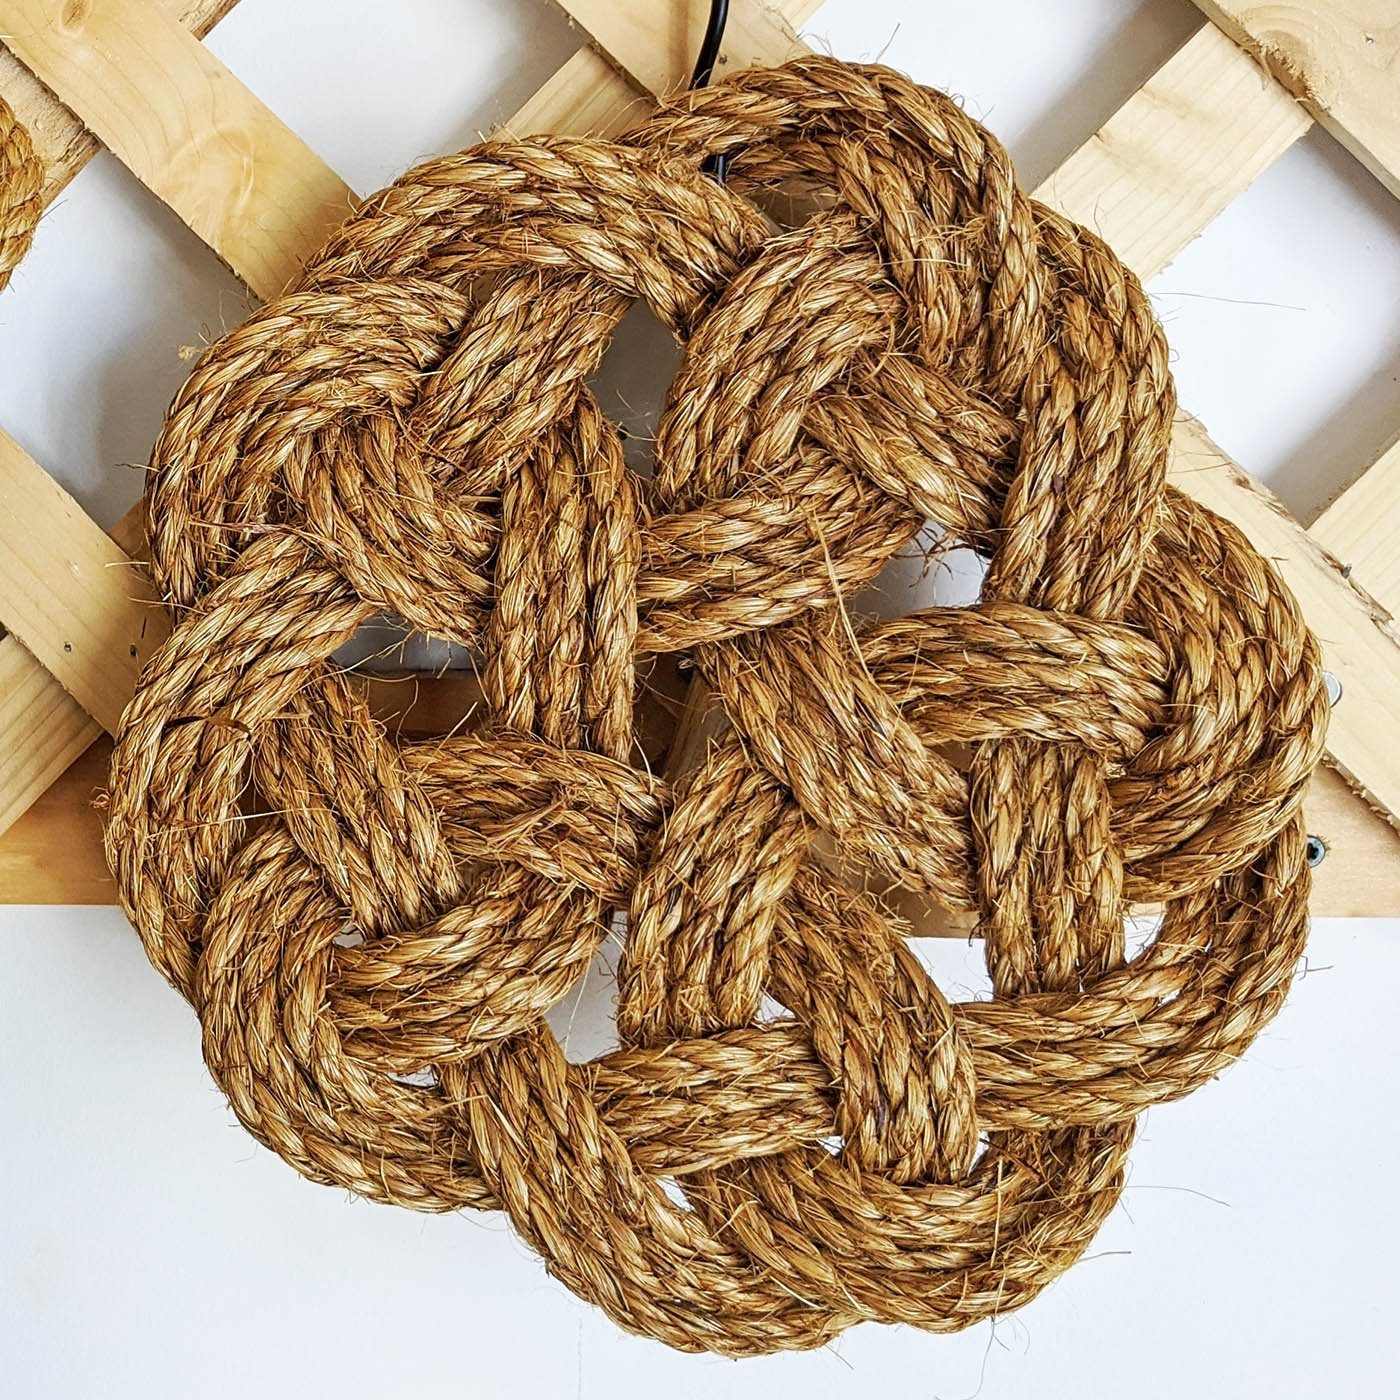 Our Downtown Mystic Shops Have One-Of-A-Kind Knotty Surprises